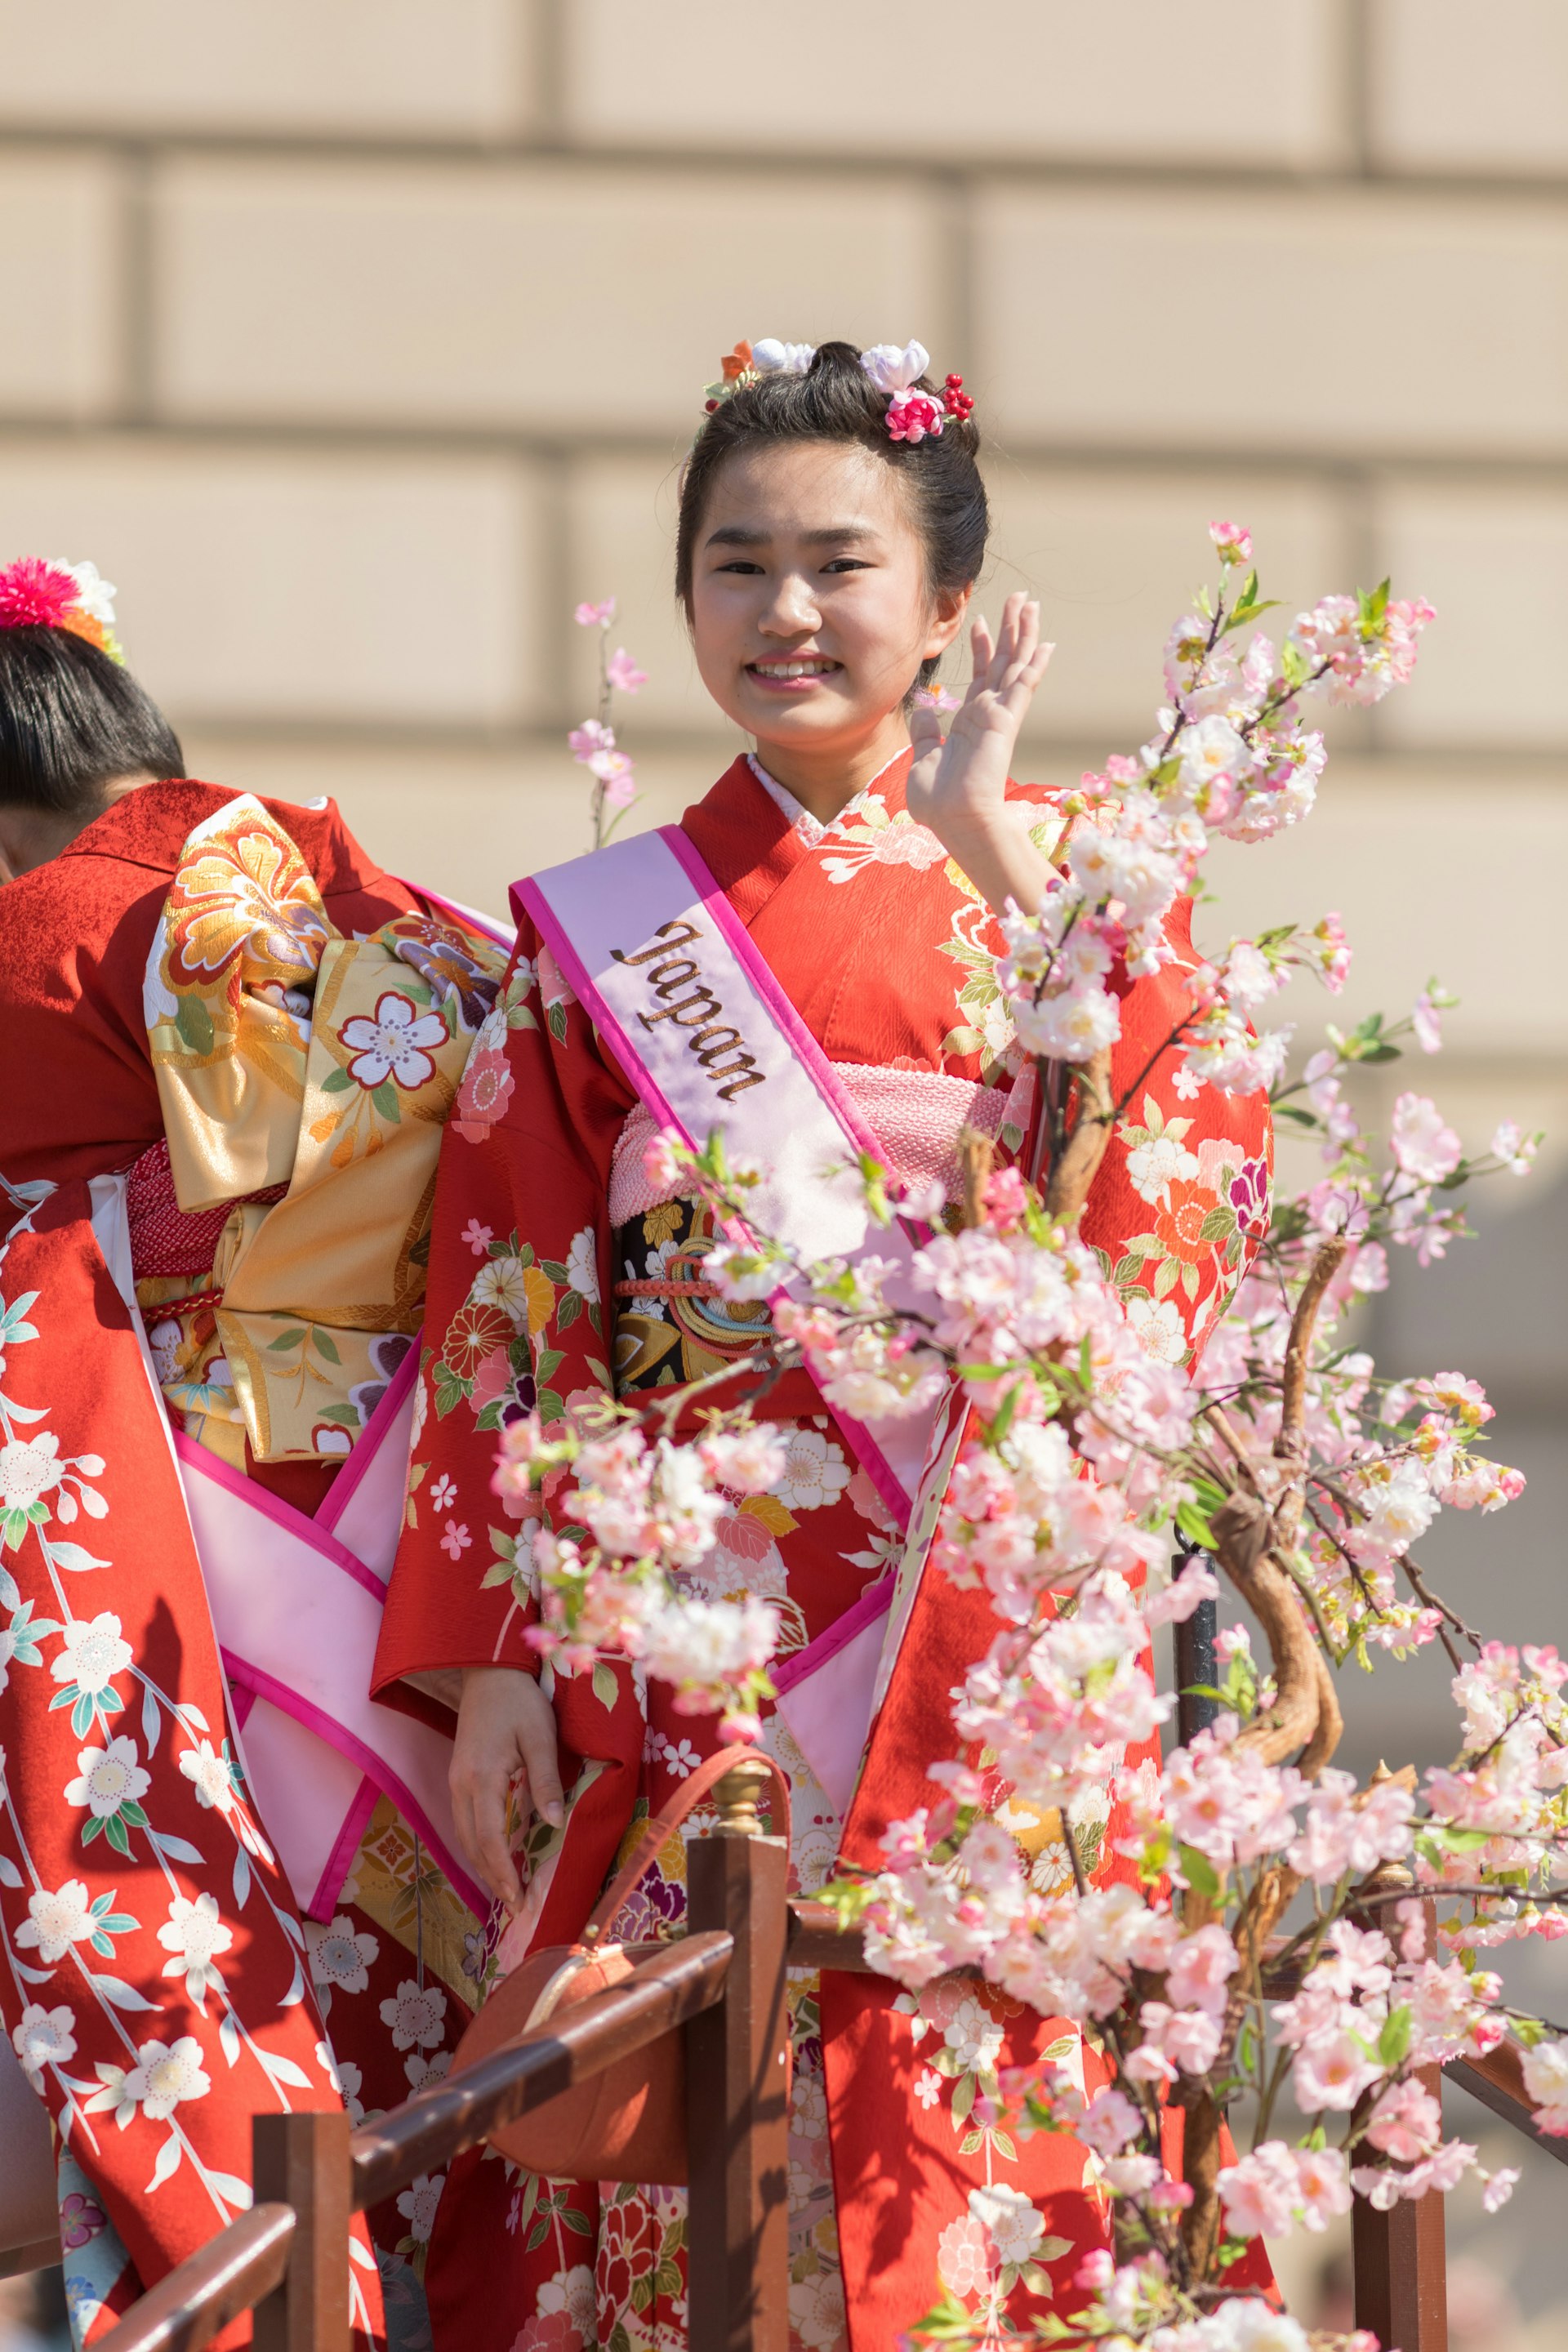 A Japanese woman wearing a kimono's stands behind cherry blossom flowers in the 2018 National Cherry Blossom Parade.